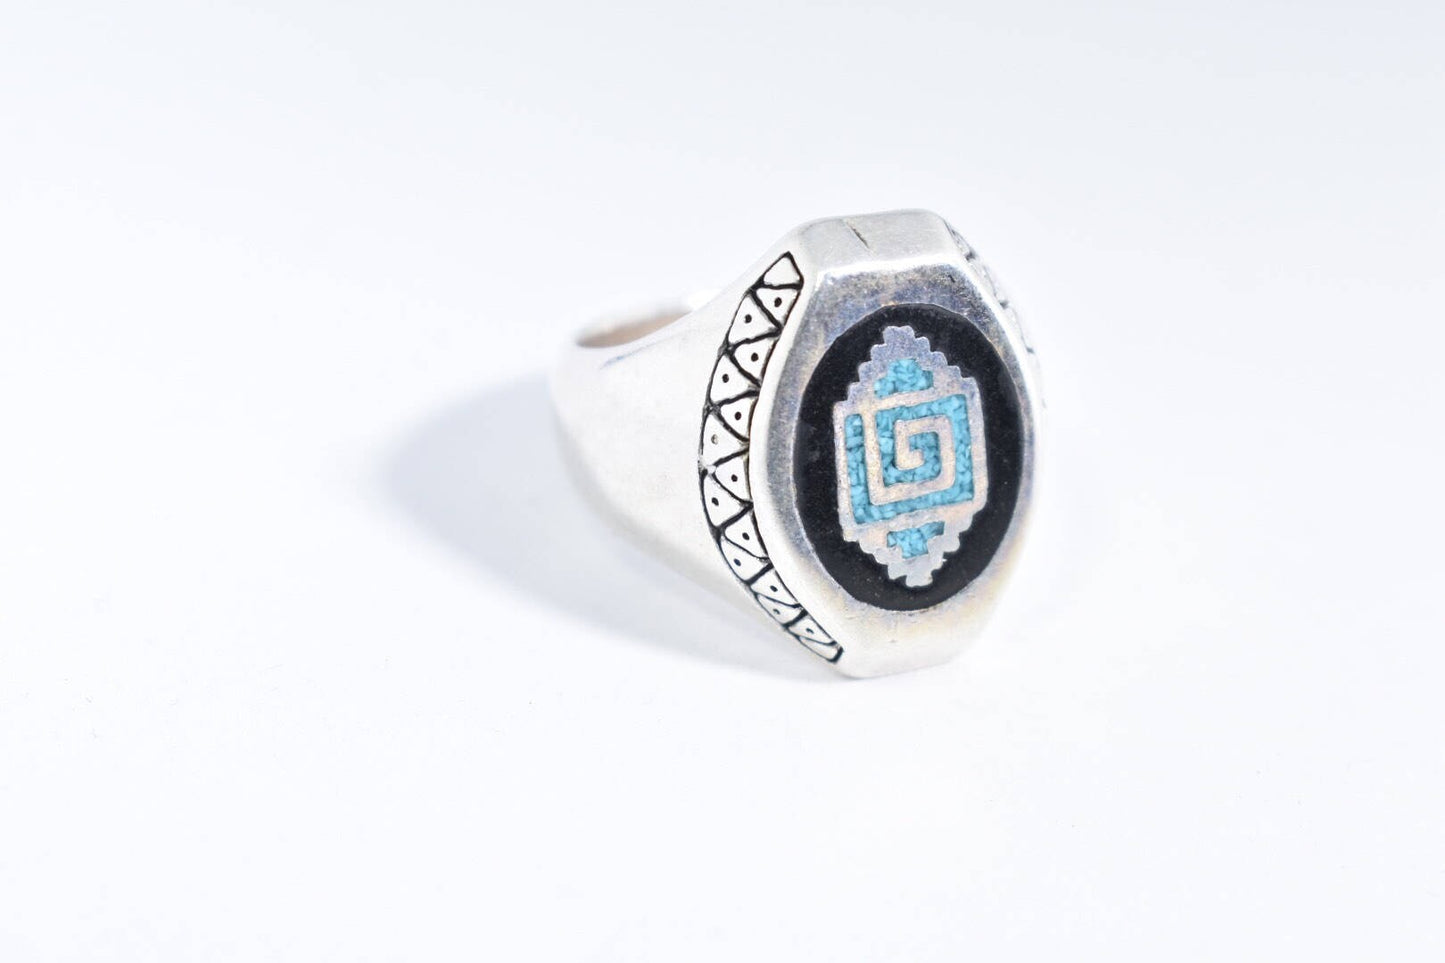 Vintage Native American Style Southwestern Turquoise Stone Inlay Men's Ring